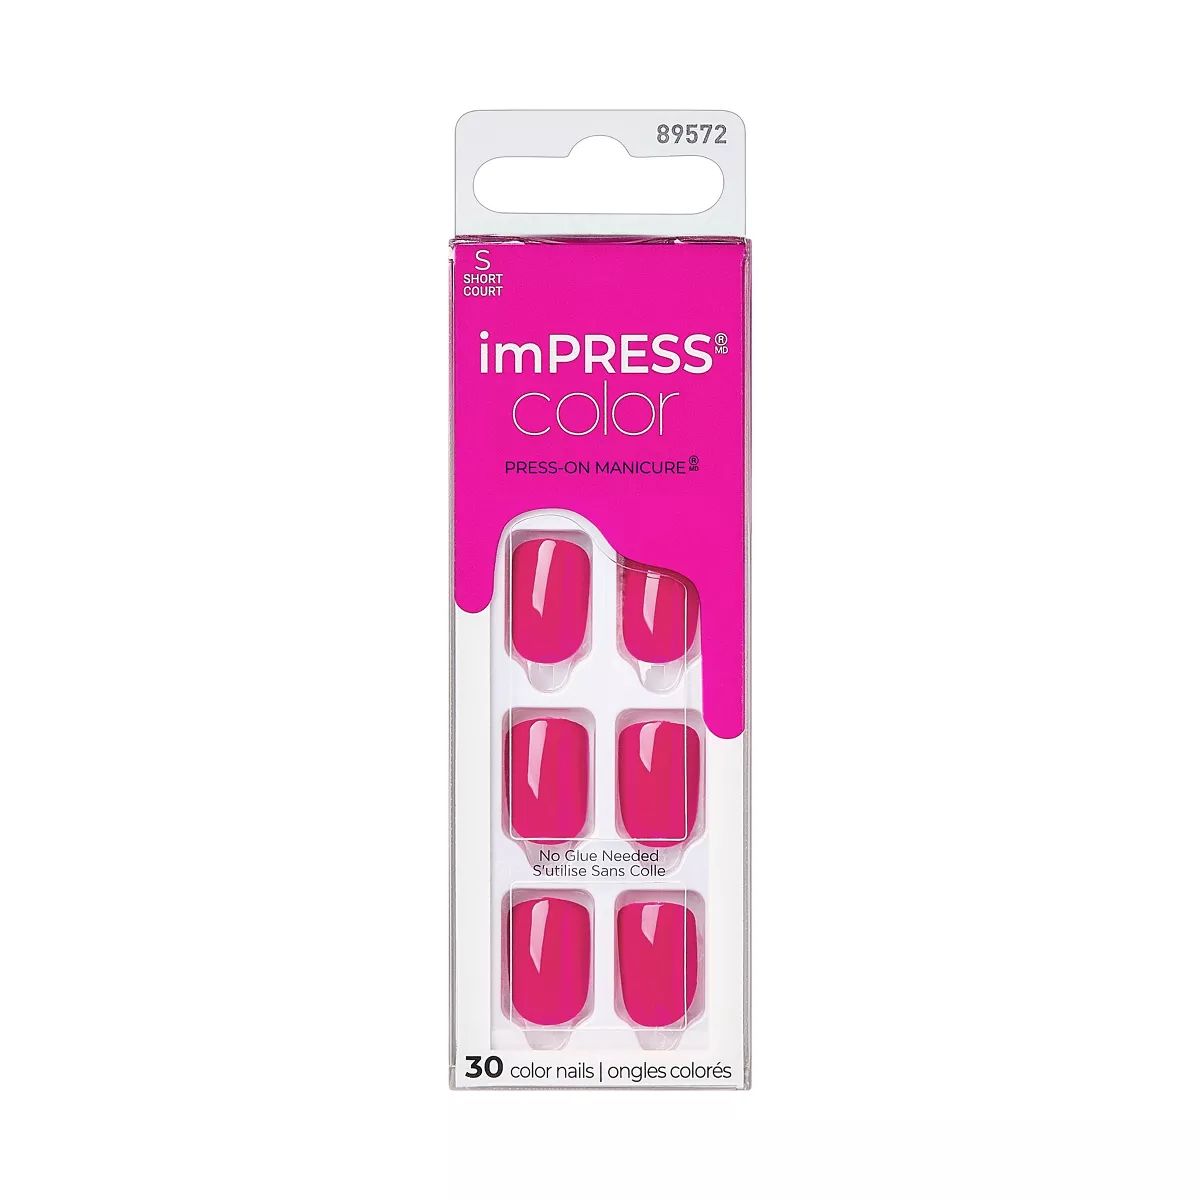 imPRESS Press-On Manicure Short Square Fake Nails - All Smiles - 33ct | Target